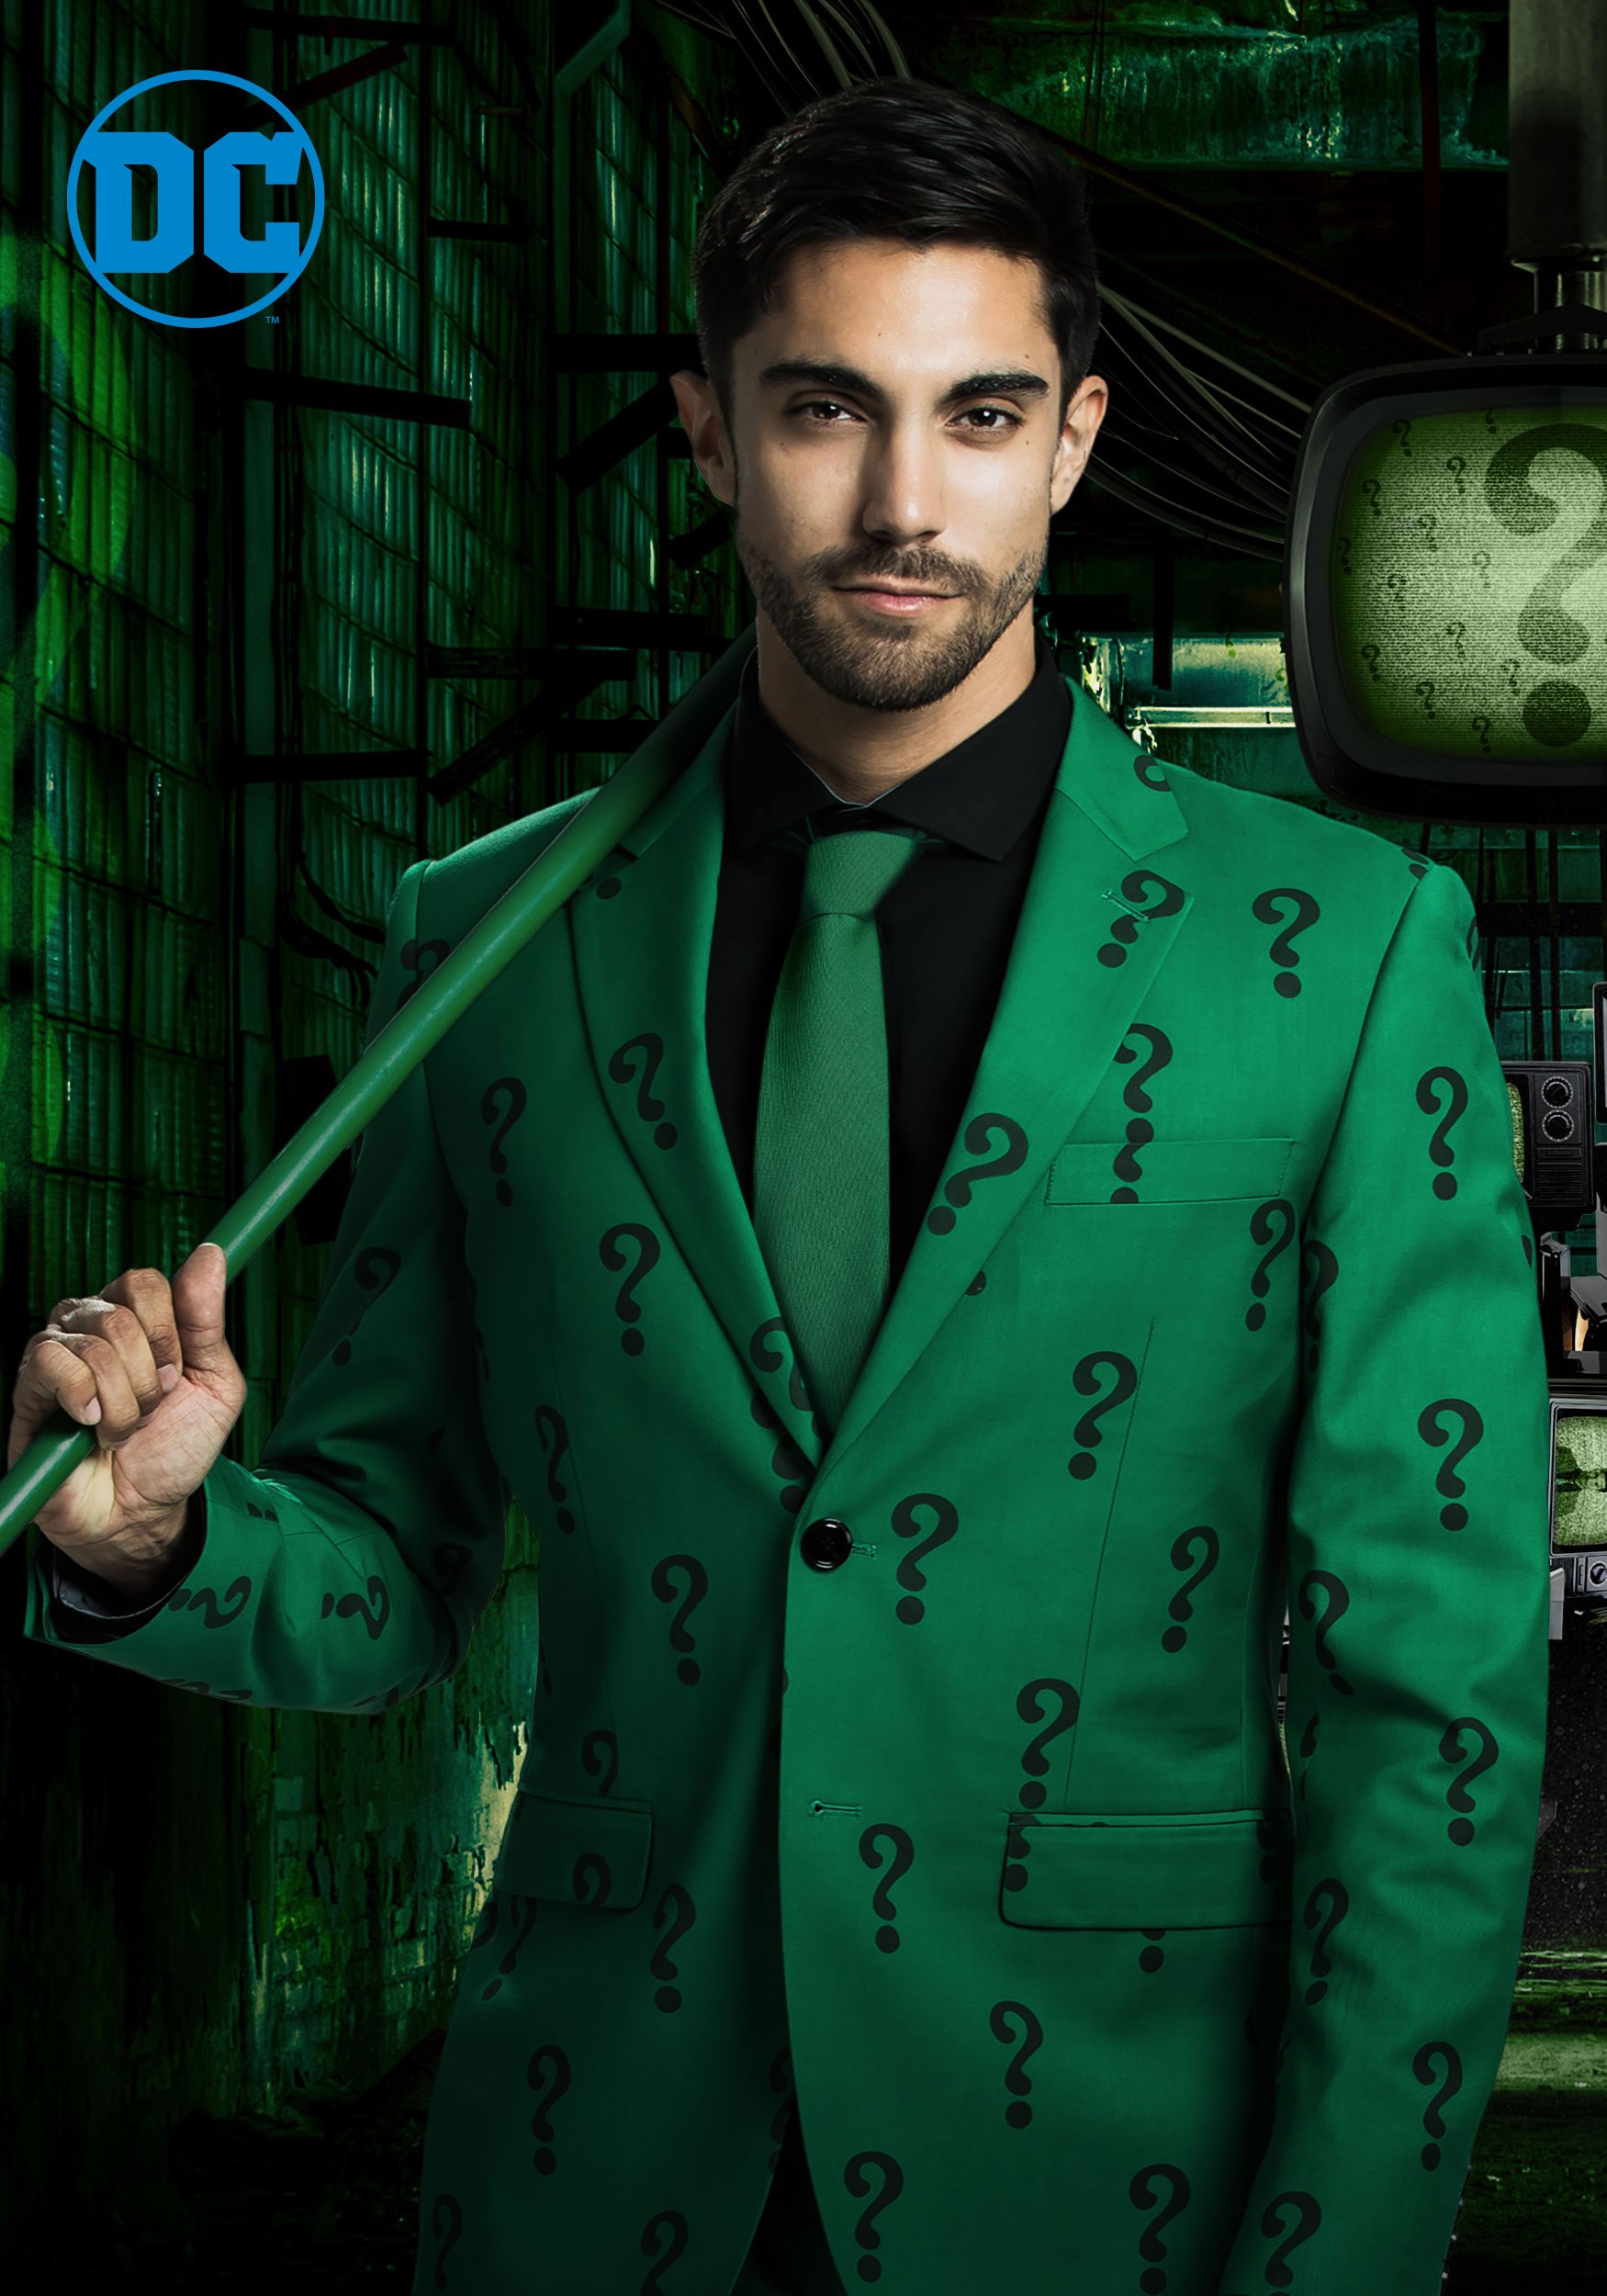 https://images.halloweencostumes.ca/products/40837/1-1/the-riddler-suit-jacket-authentic.jpg